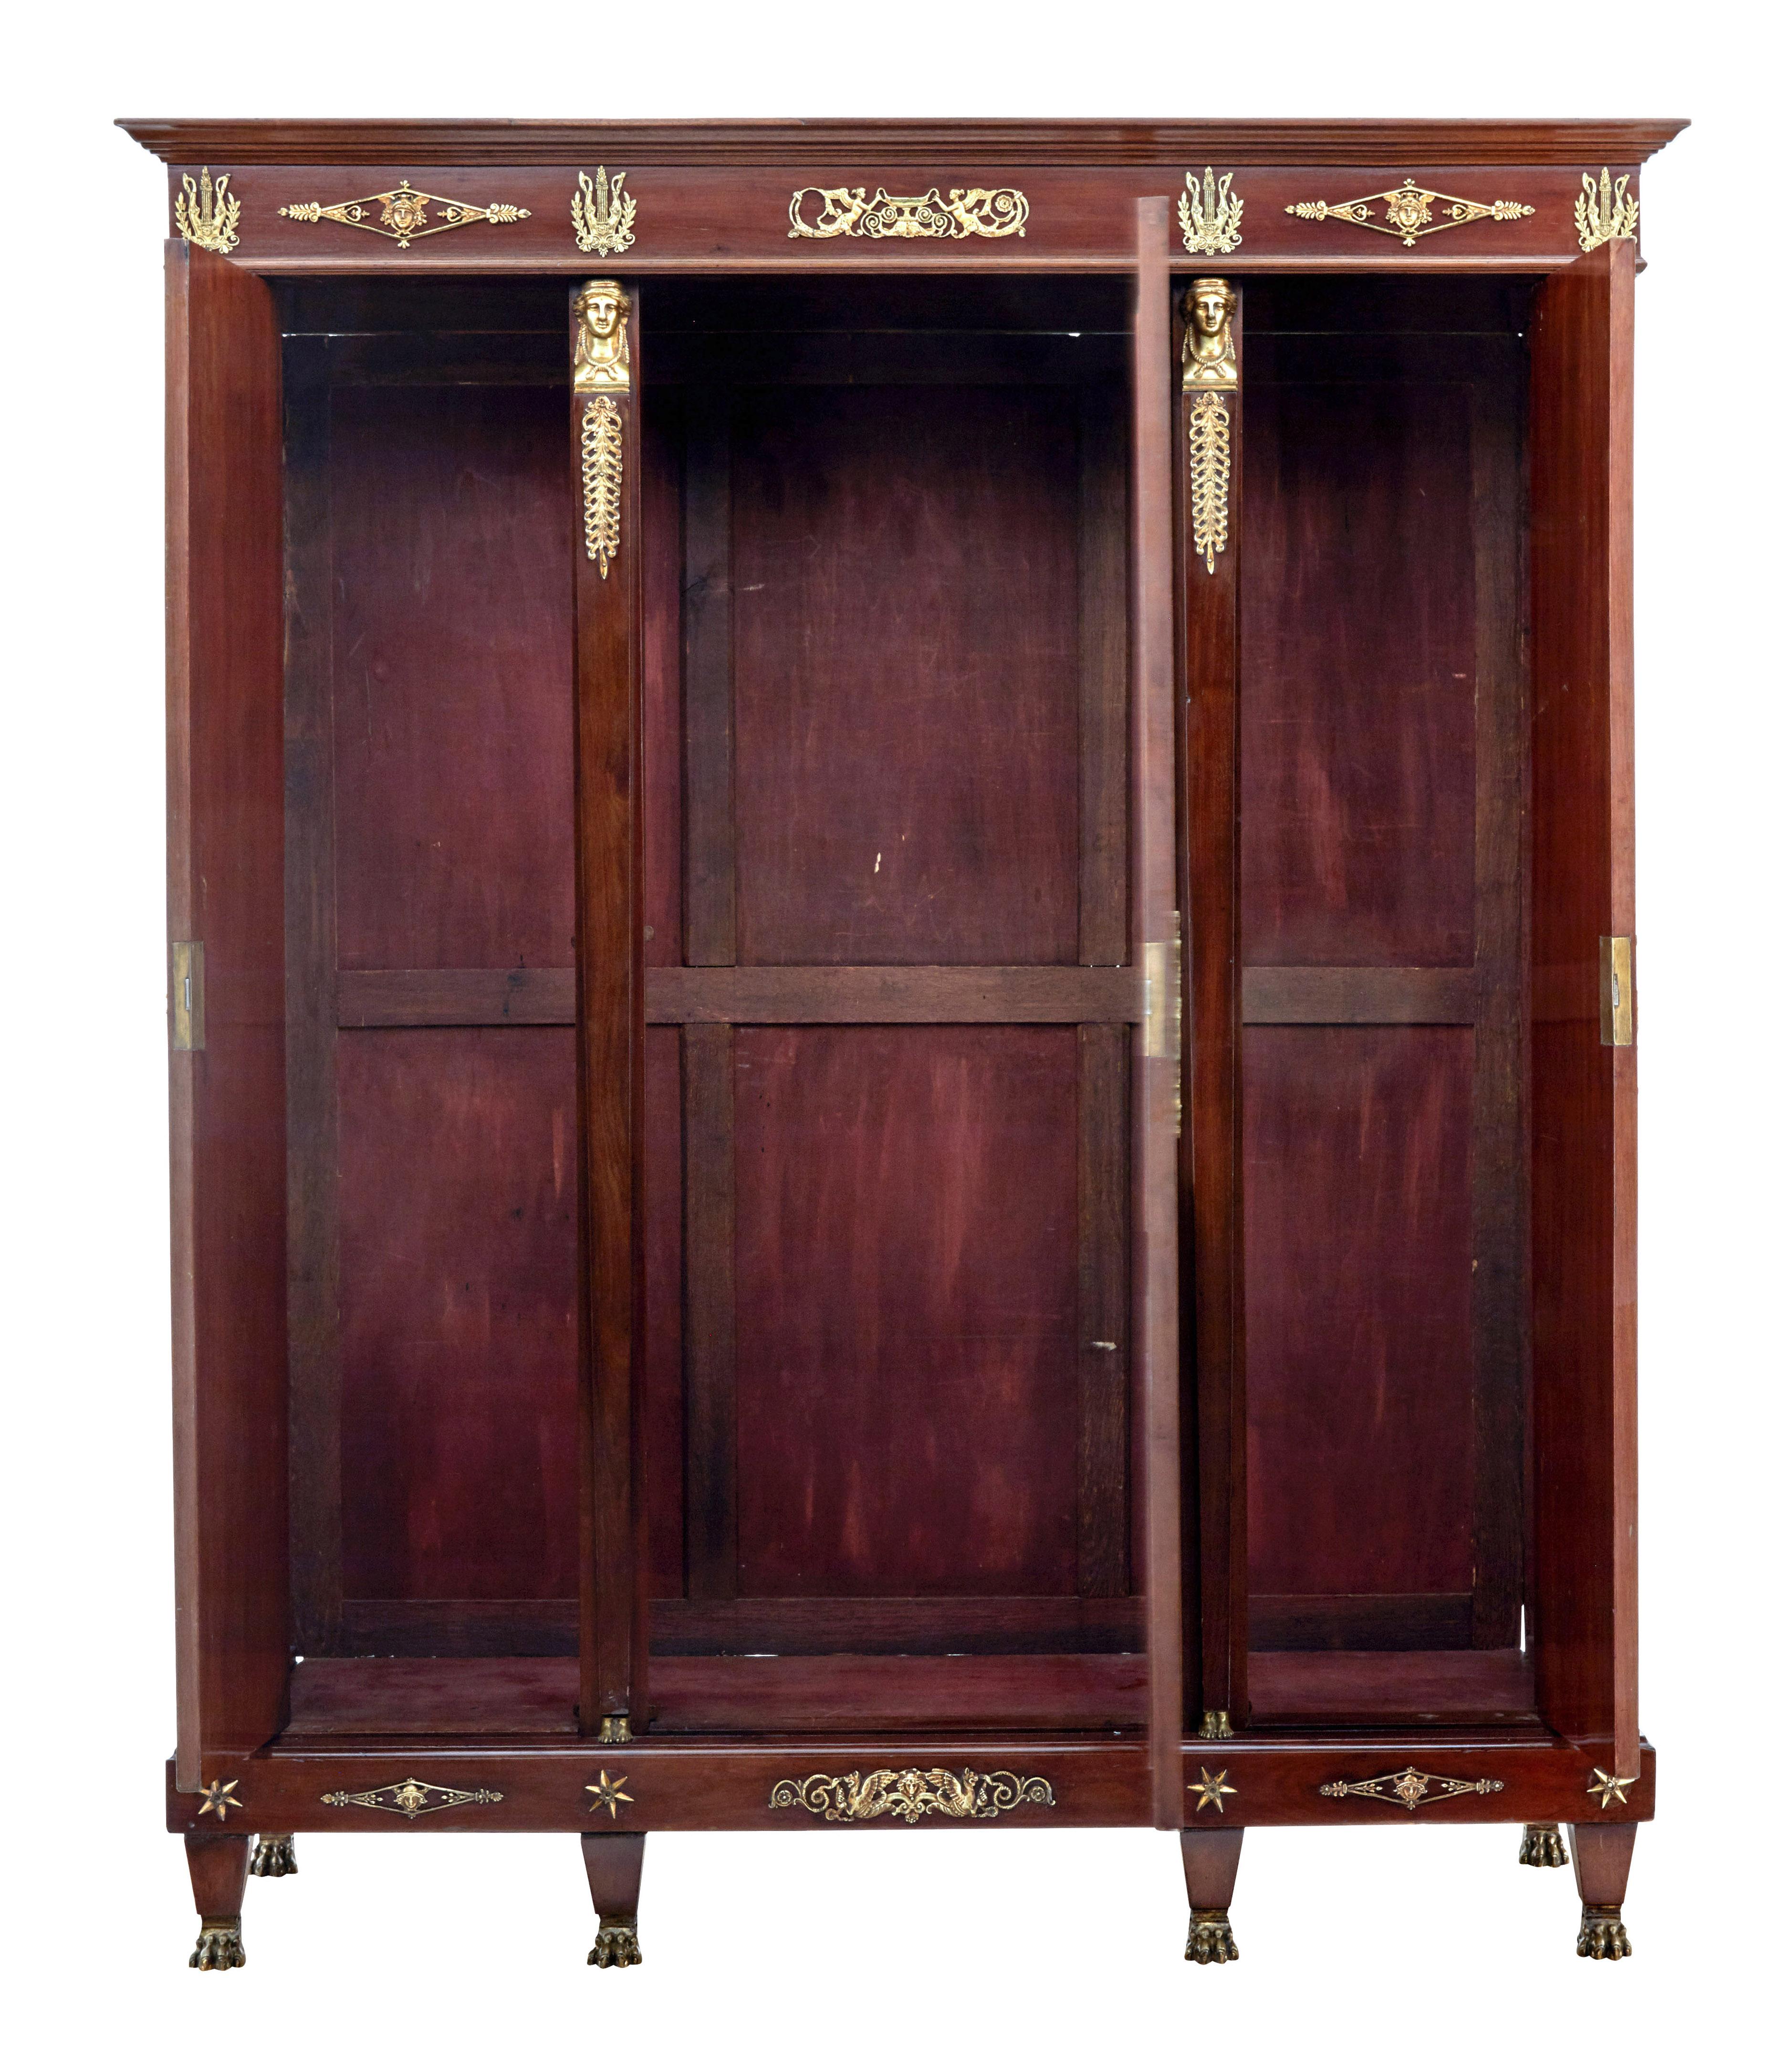 Empire Revival Late 19th Century French Mahogany and Ormolu Armoire